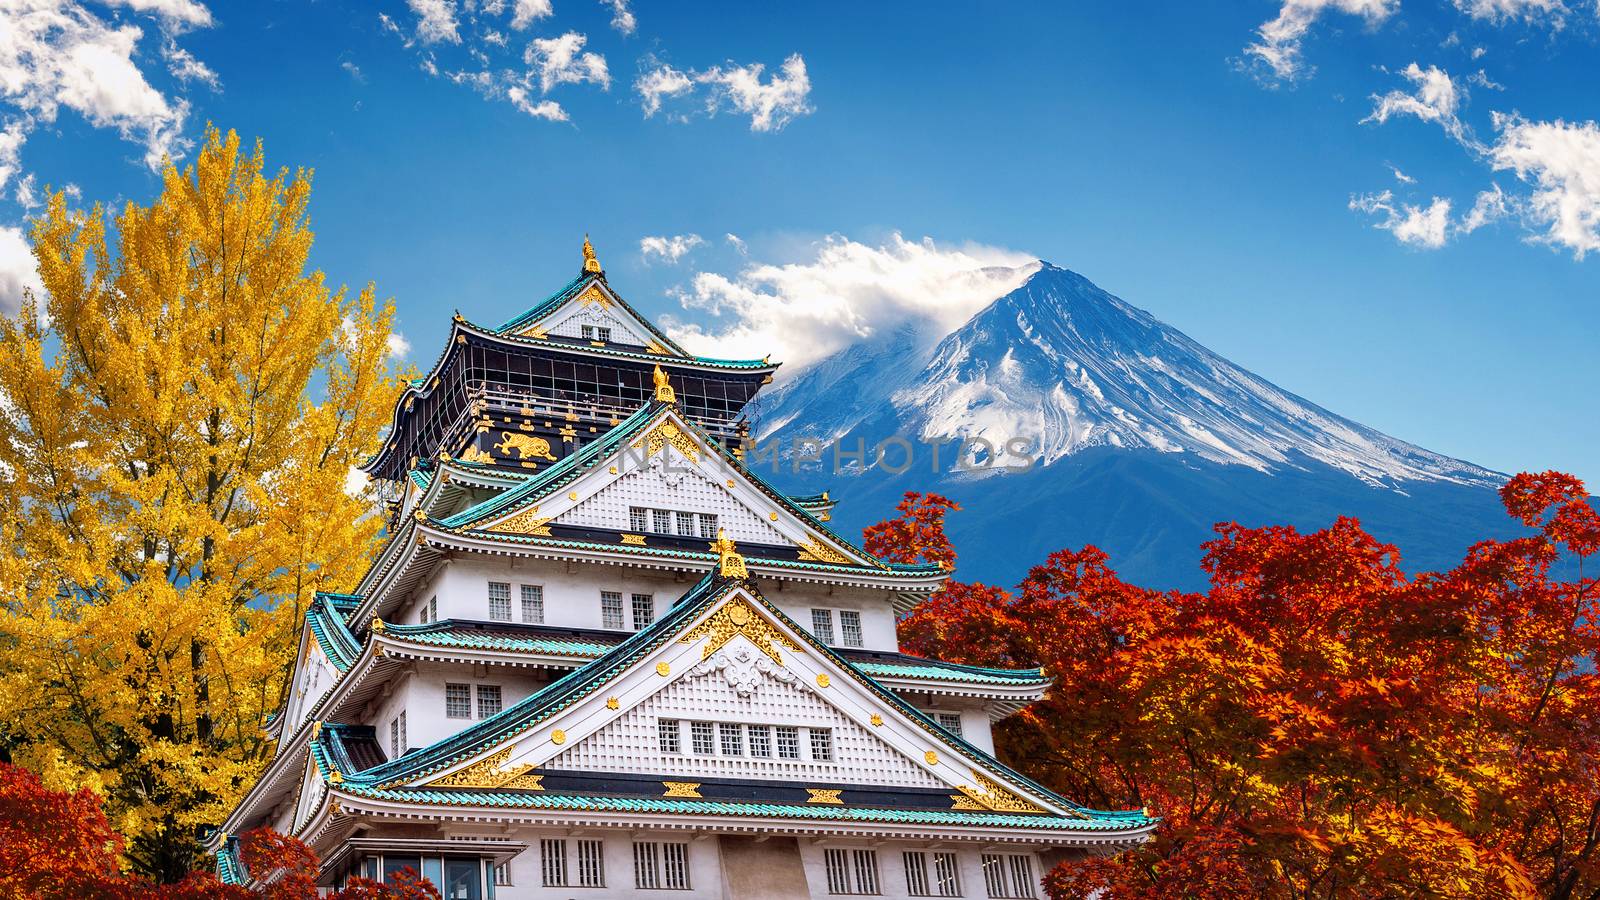 Autumn season with Fuji mountain and Castle in Japan. by gutarphotoghaphy